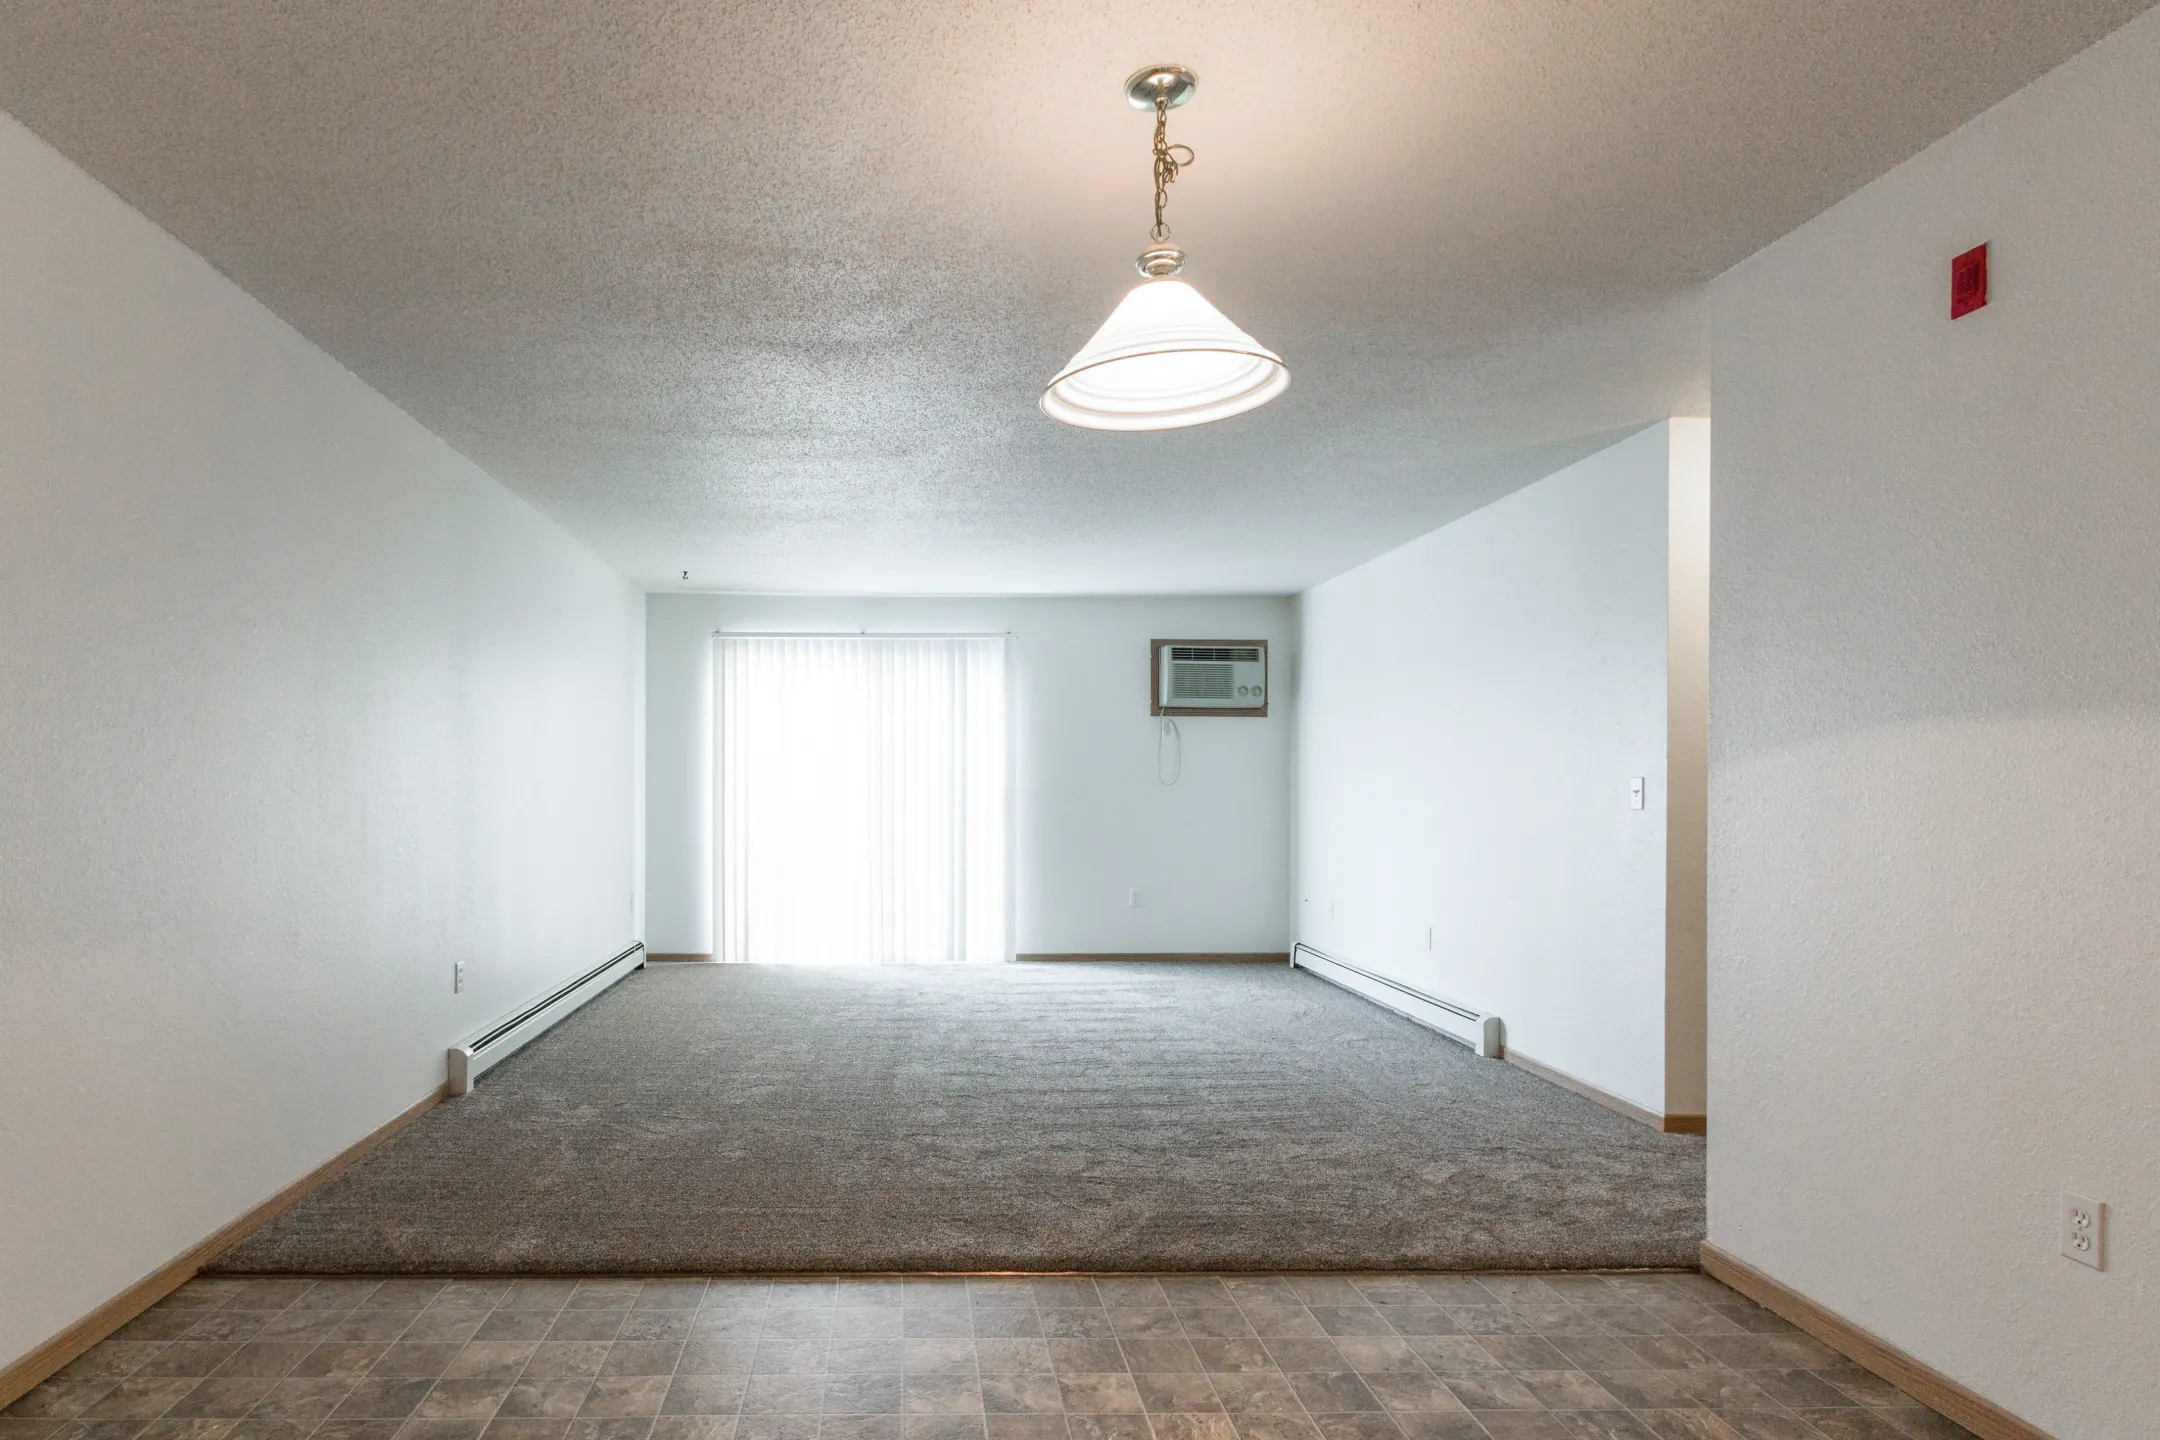 Living Room - Wheatland Place Apartments & Townhomes - Fargo, ND